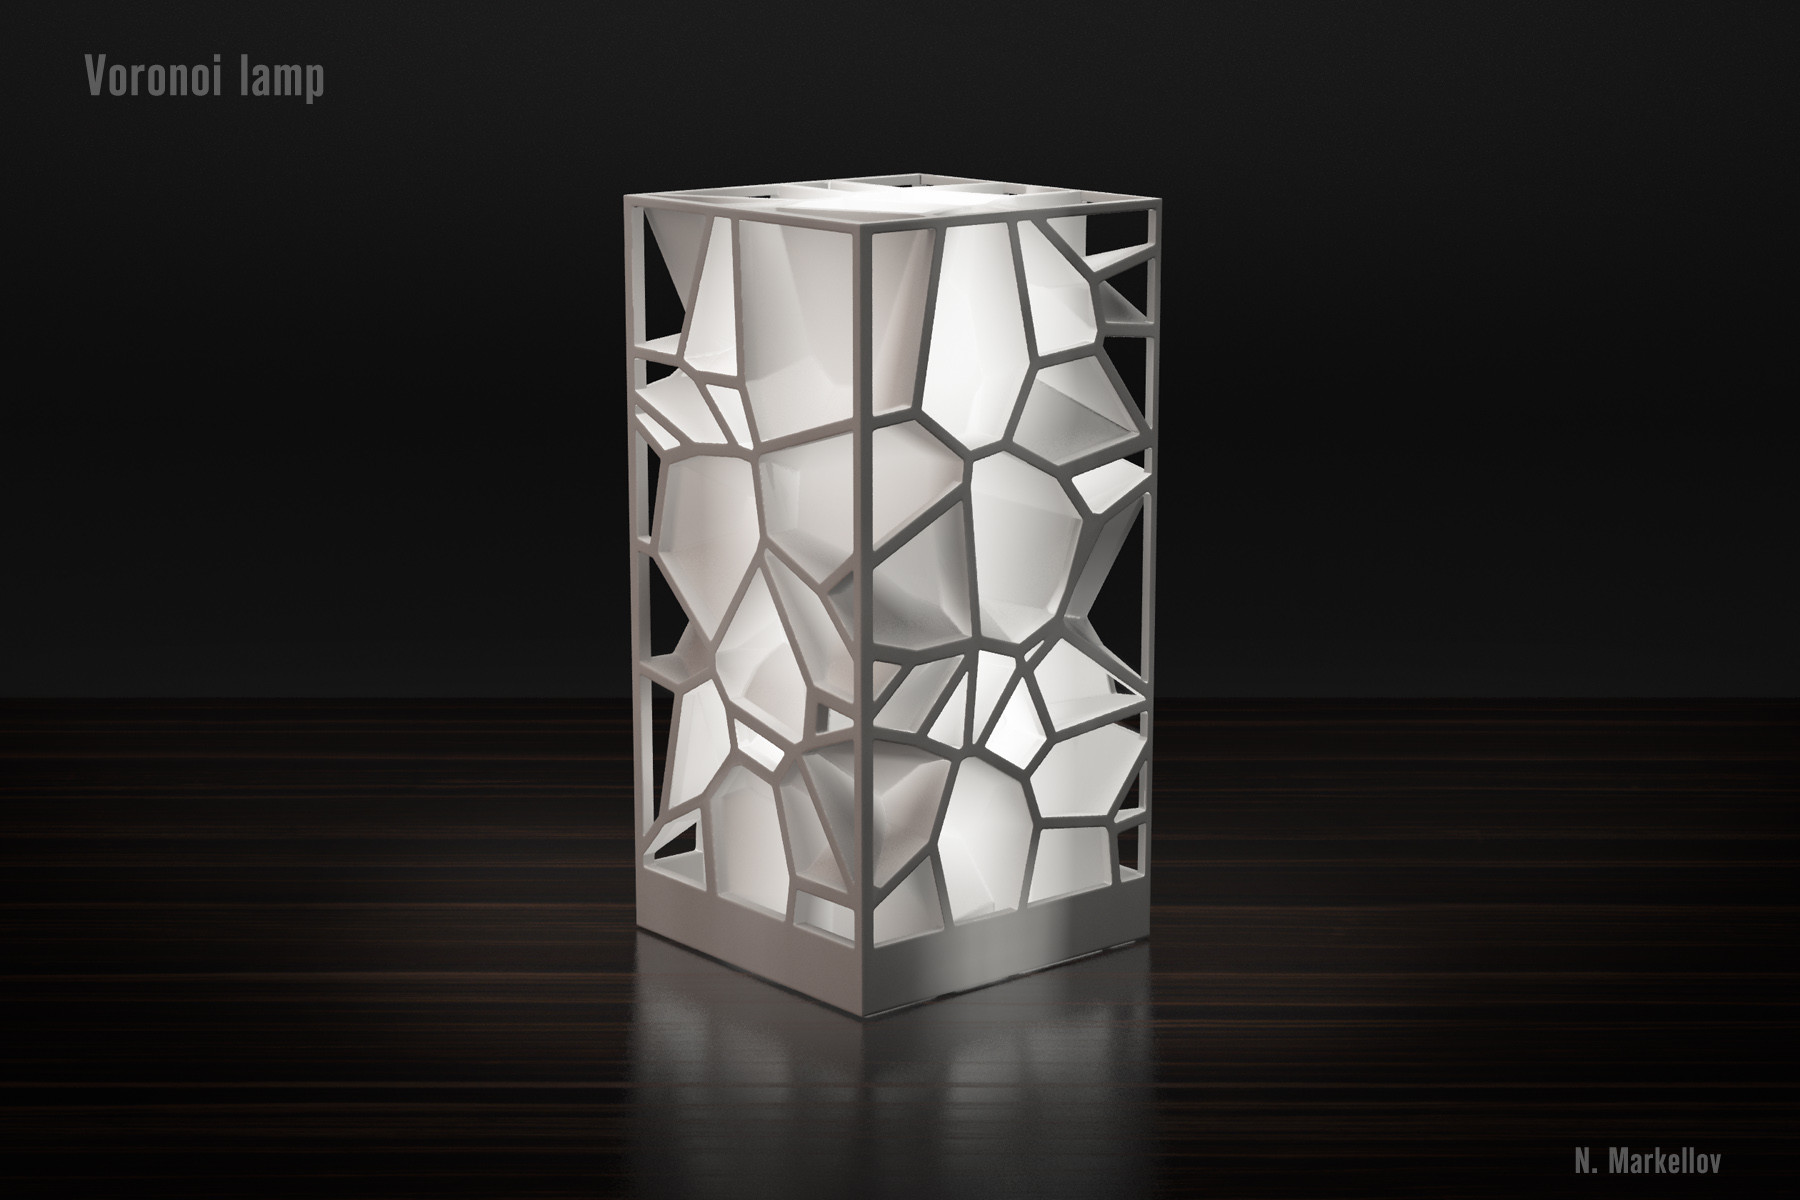 28 Unique 3d Puzzle Vase 2024 free download 3d puzzle vase of voronoi lamp by markellov thingiverse intended for by markellov dec 9 2014 view original